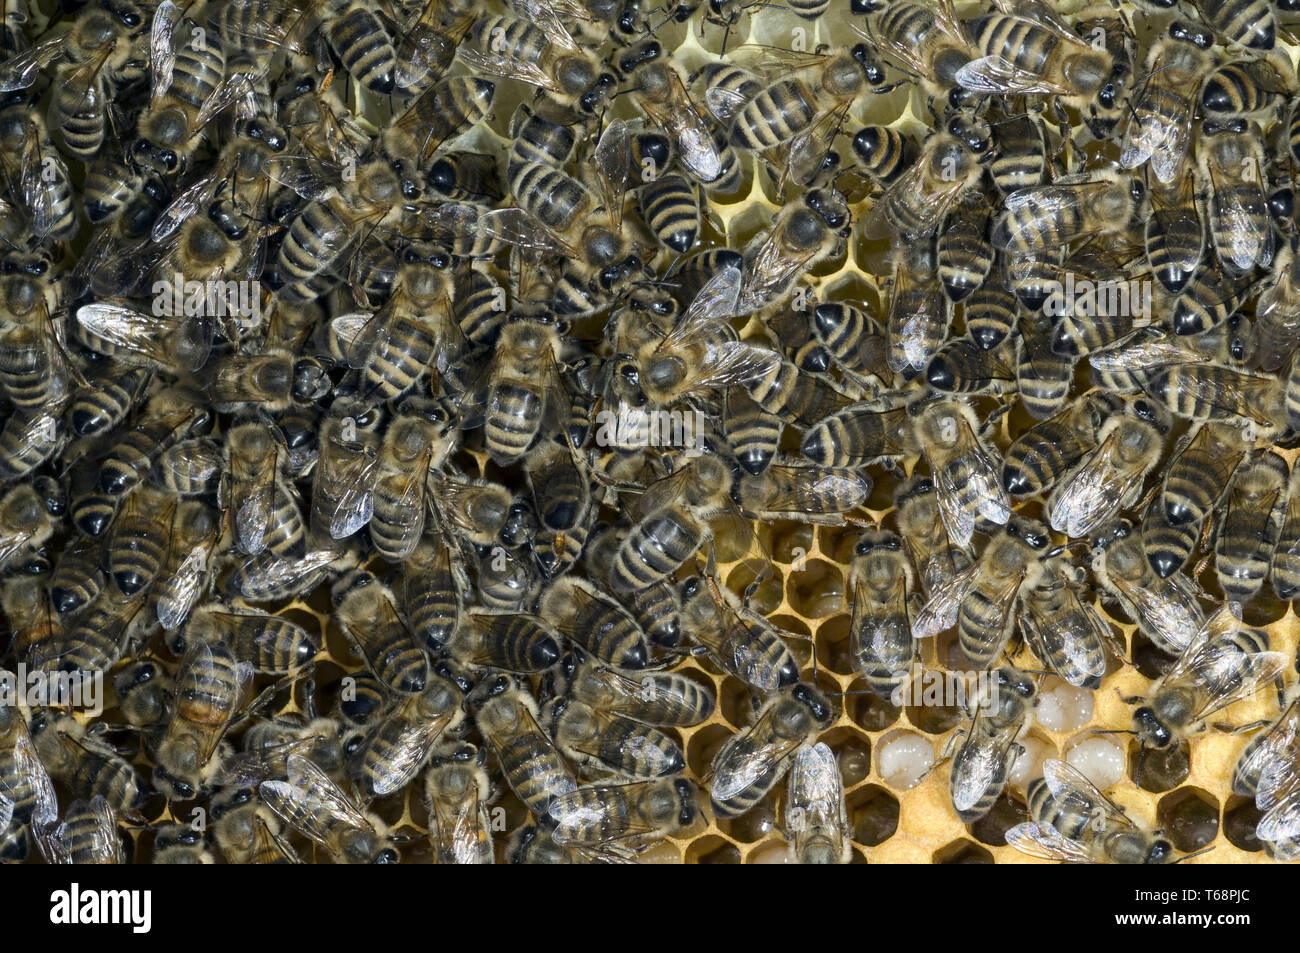 honey bees (Apis mellifica) at the Beehive Stock Photo